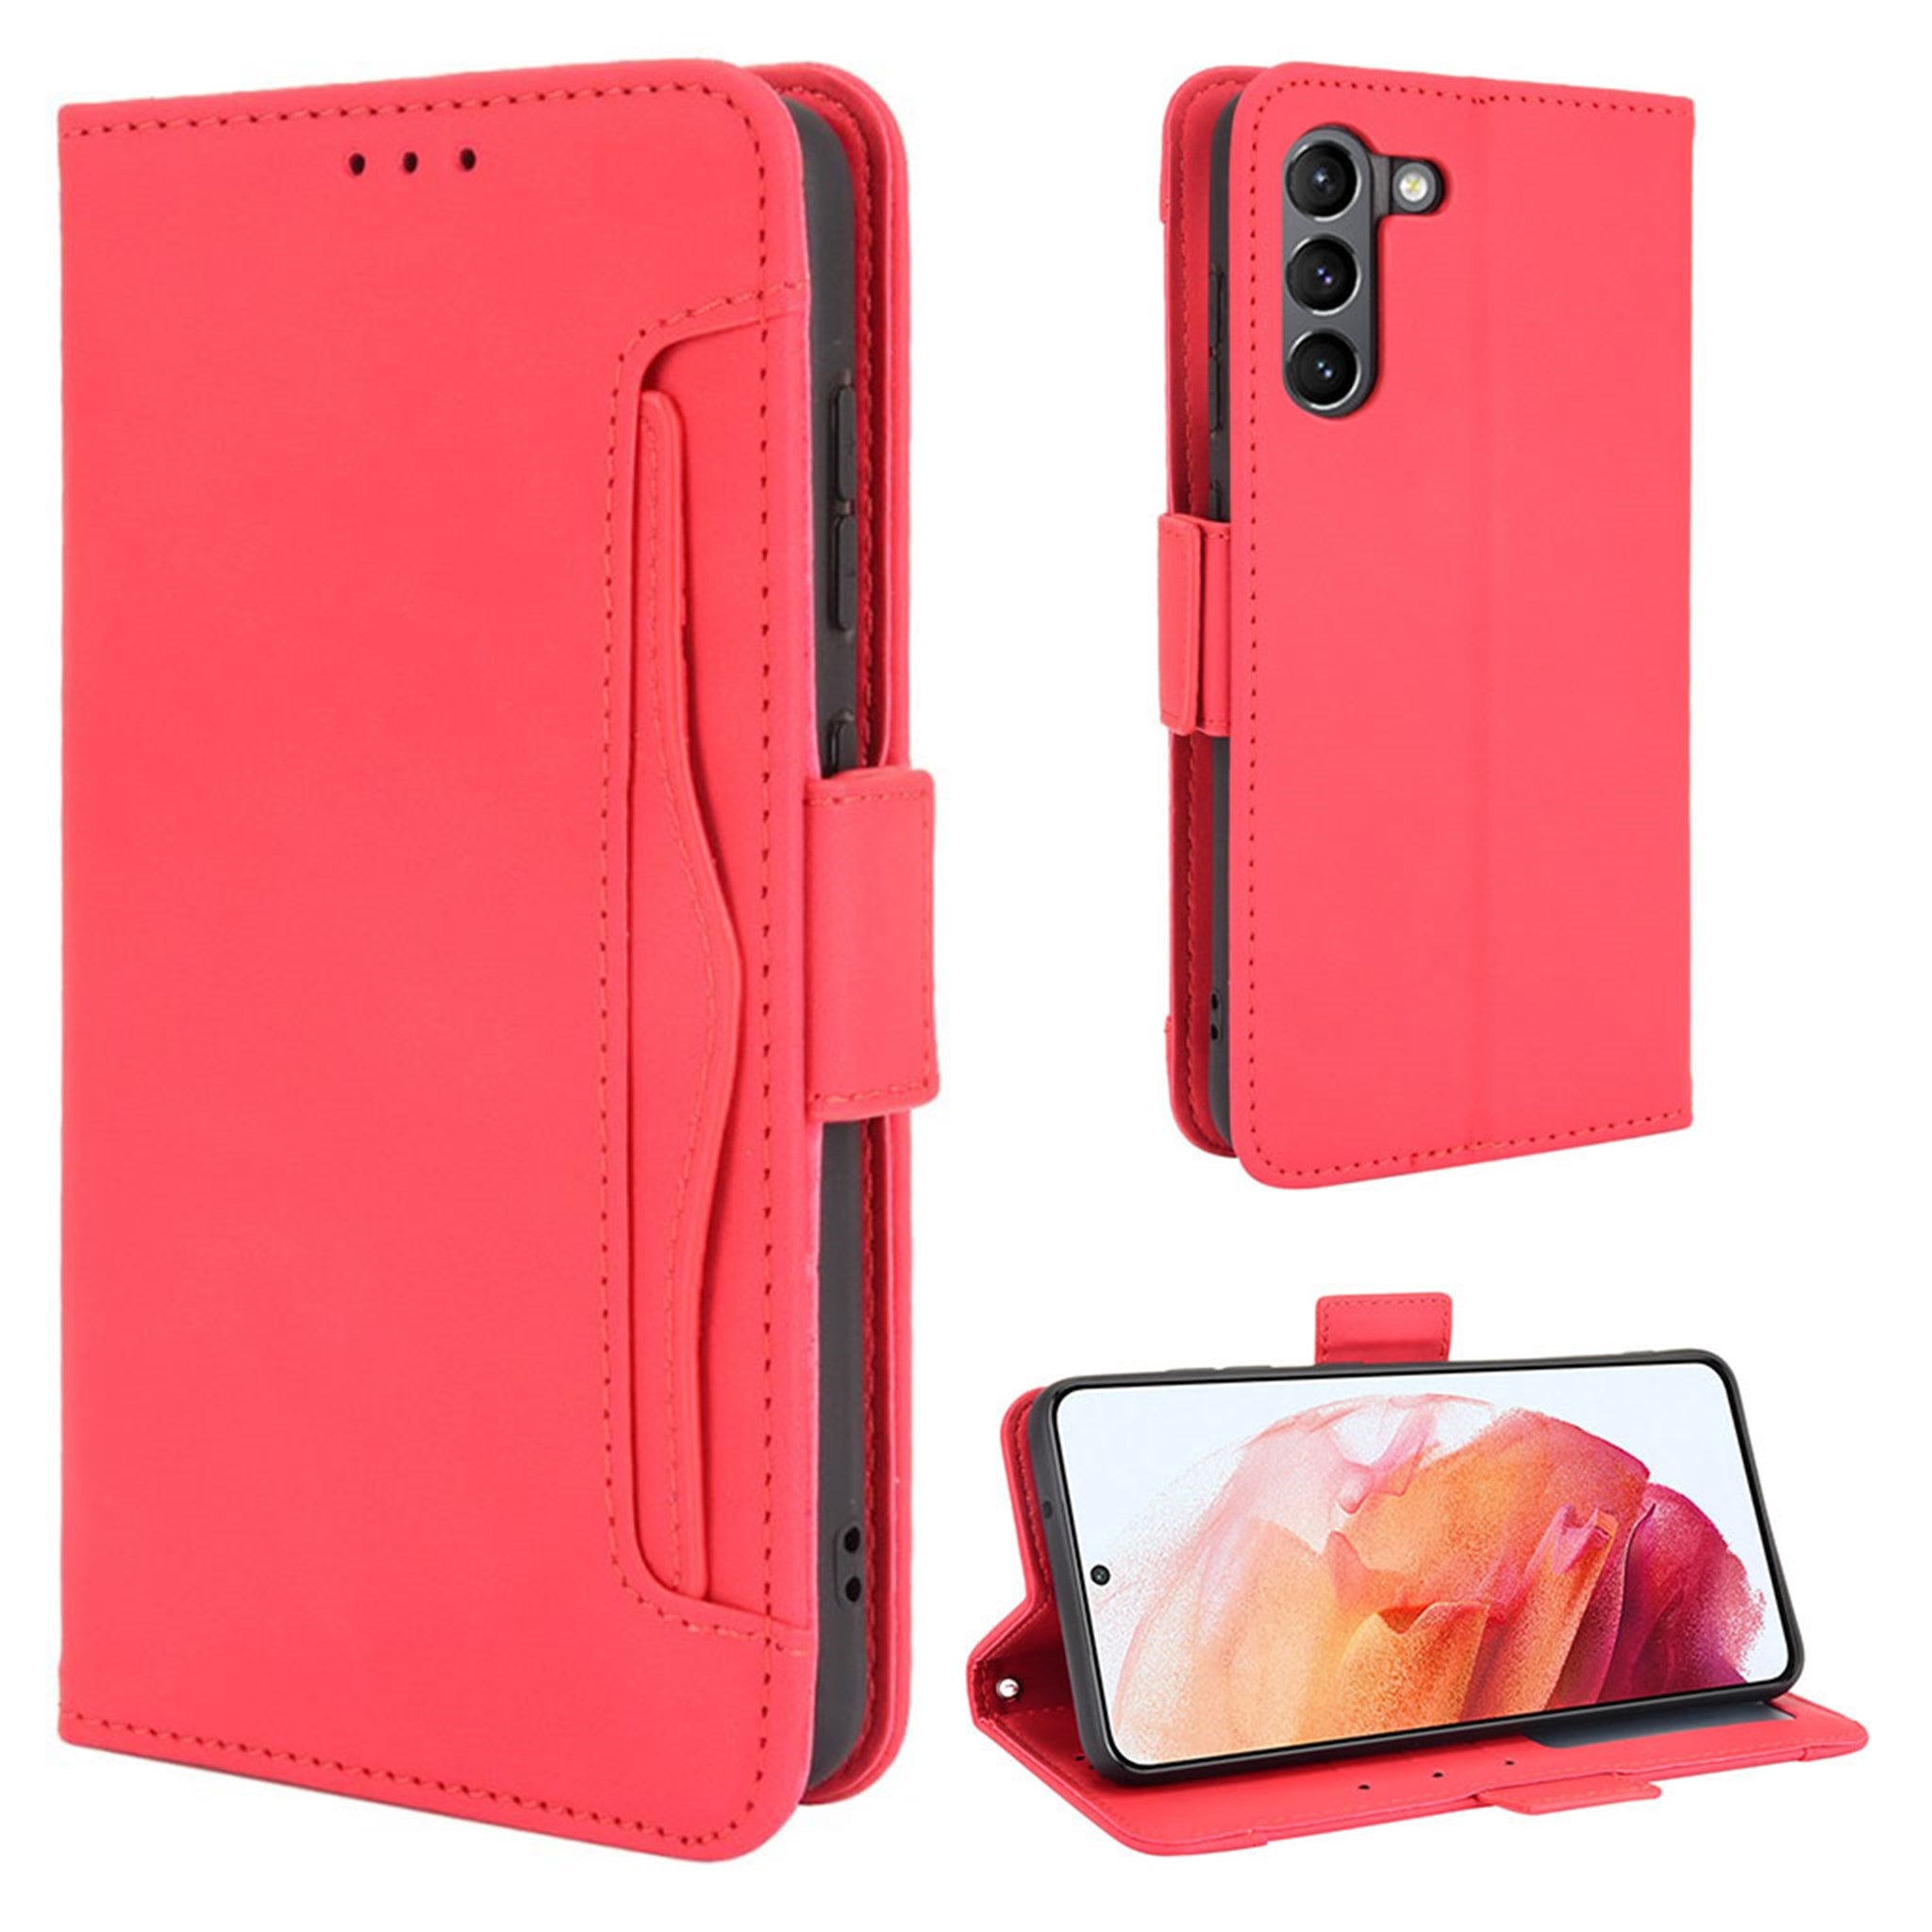 Modern-styled leather wallet case for Samsung Galaxy S21 FE - Red